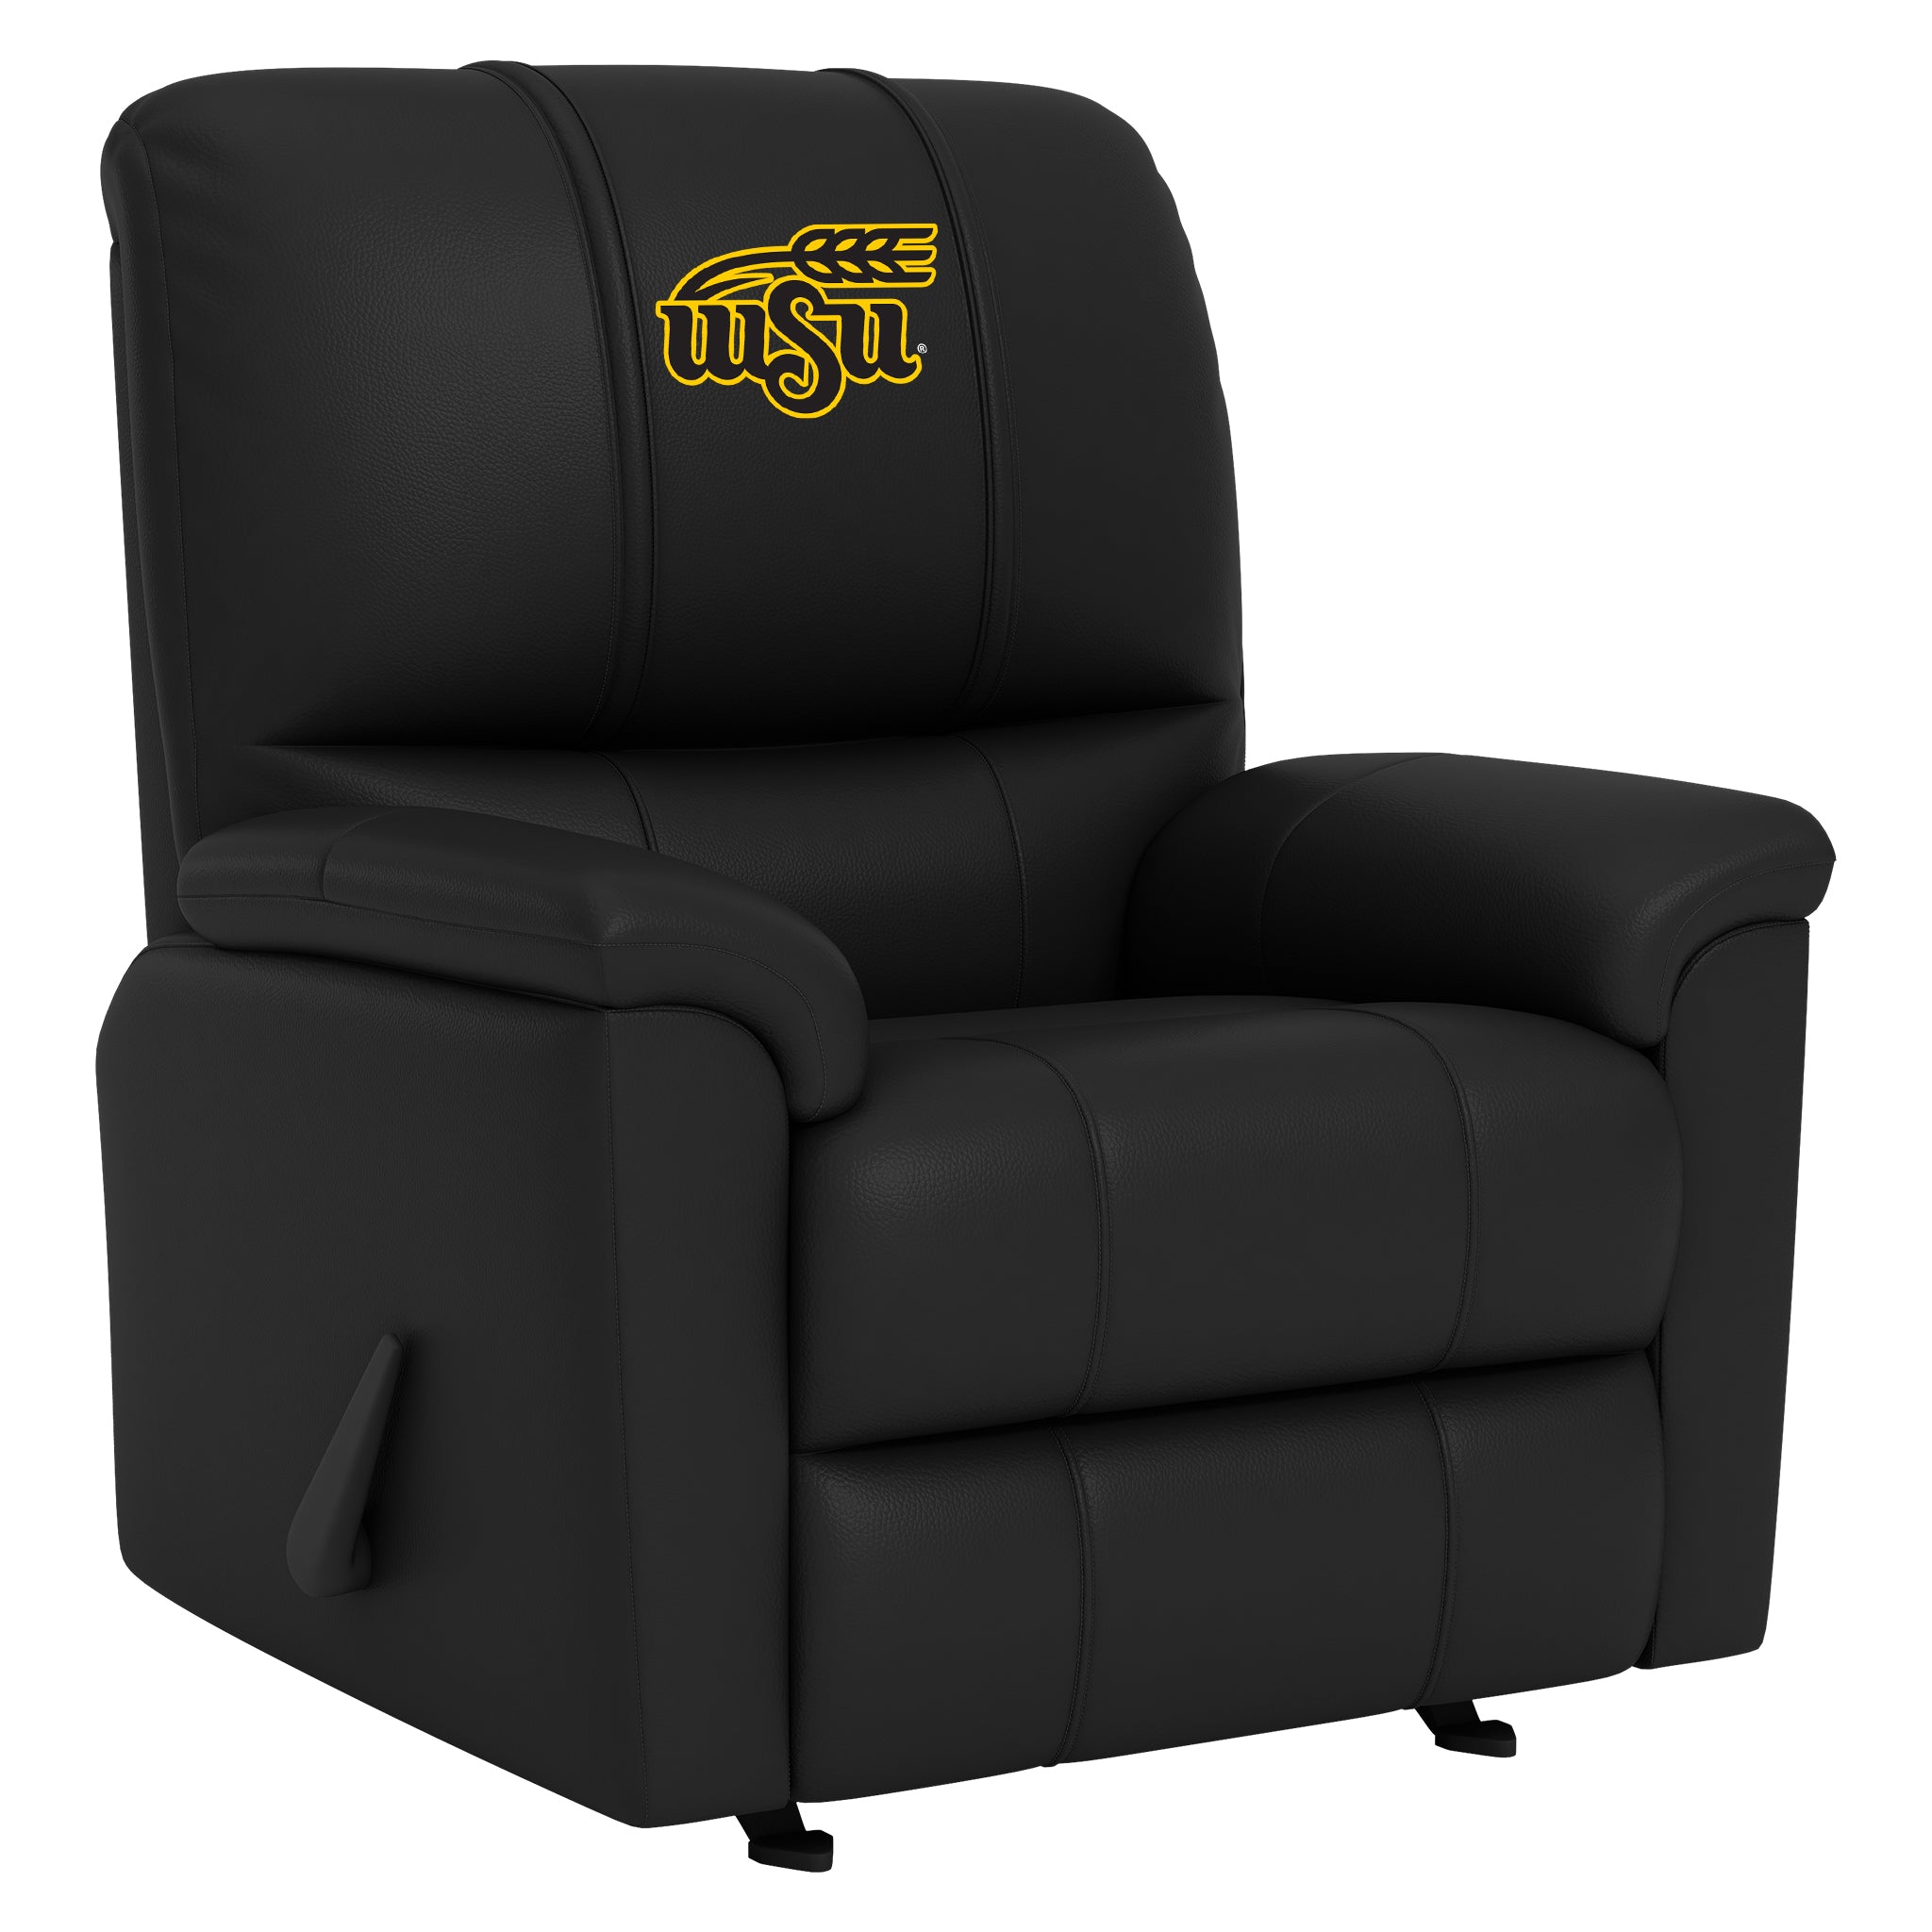 University of Minnesota Silver Club Chair with University of Minnesota Alternate Logo